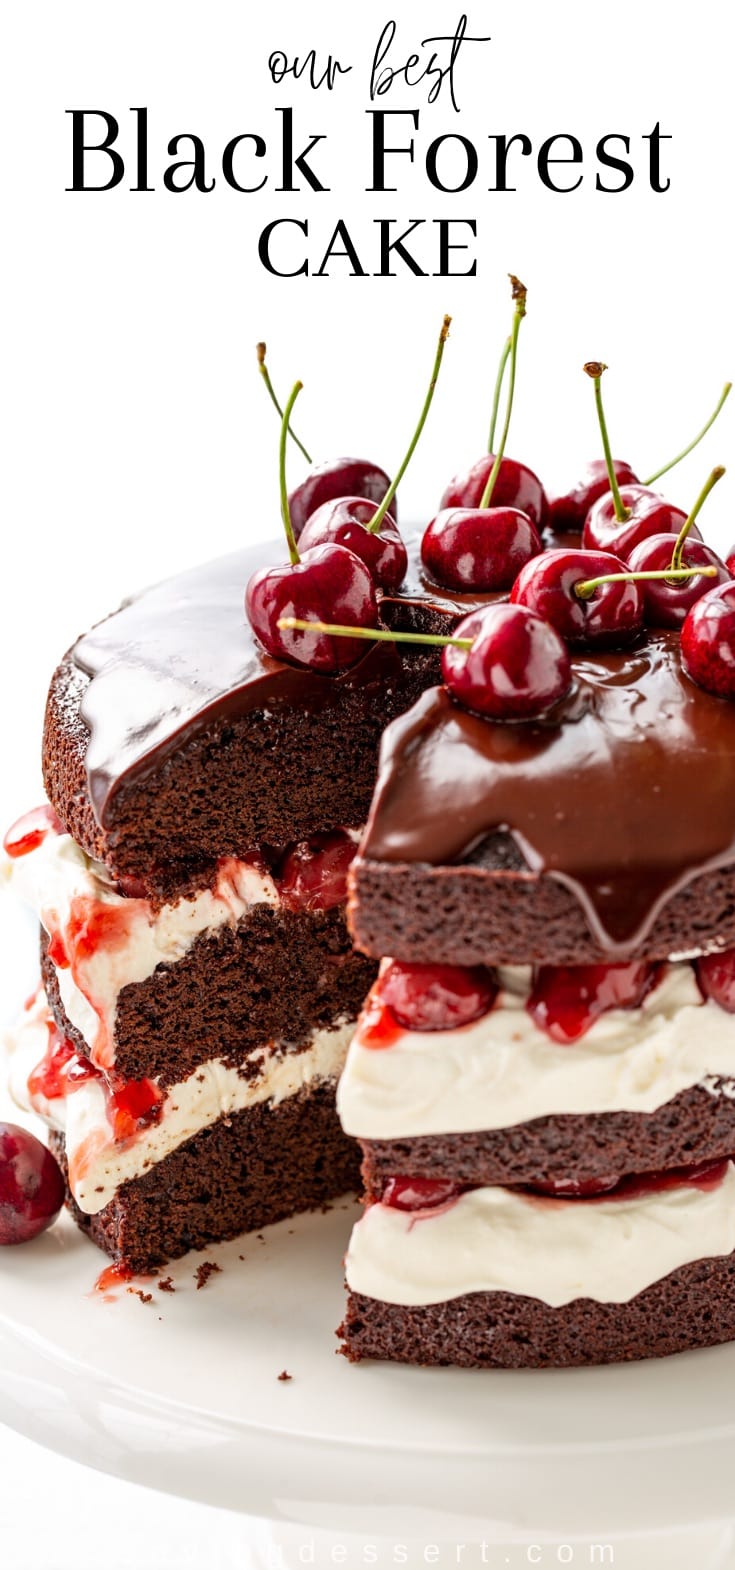 A sliced three layer Black Forest Cake draped in chocolate ganache and topped with fresh cherries